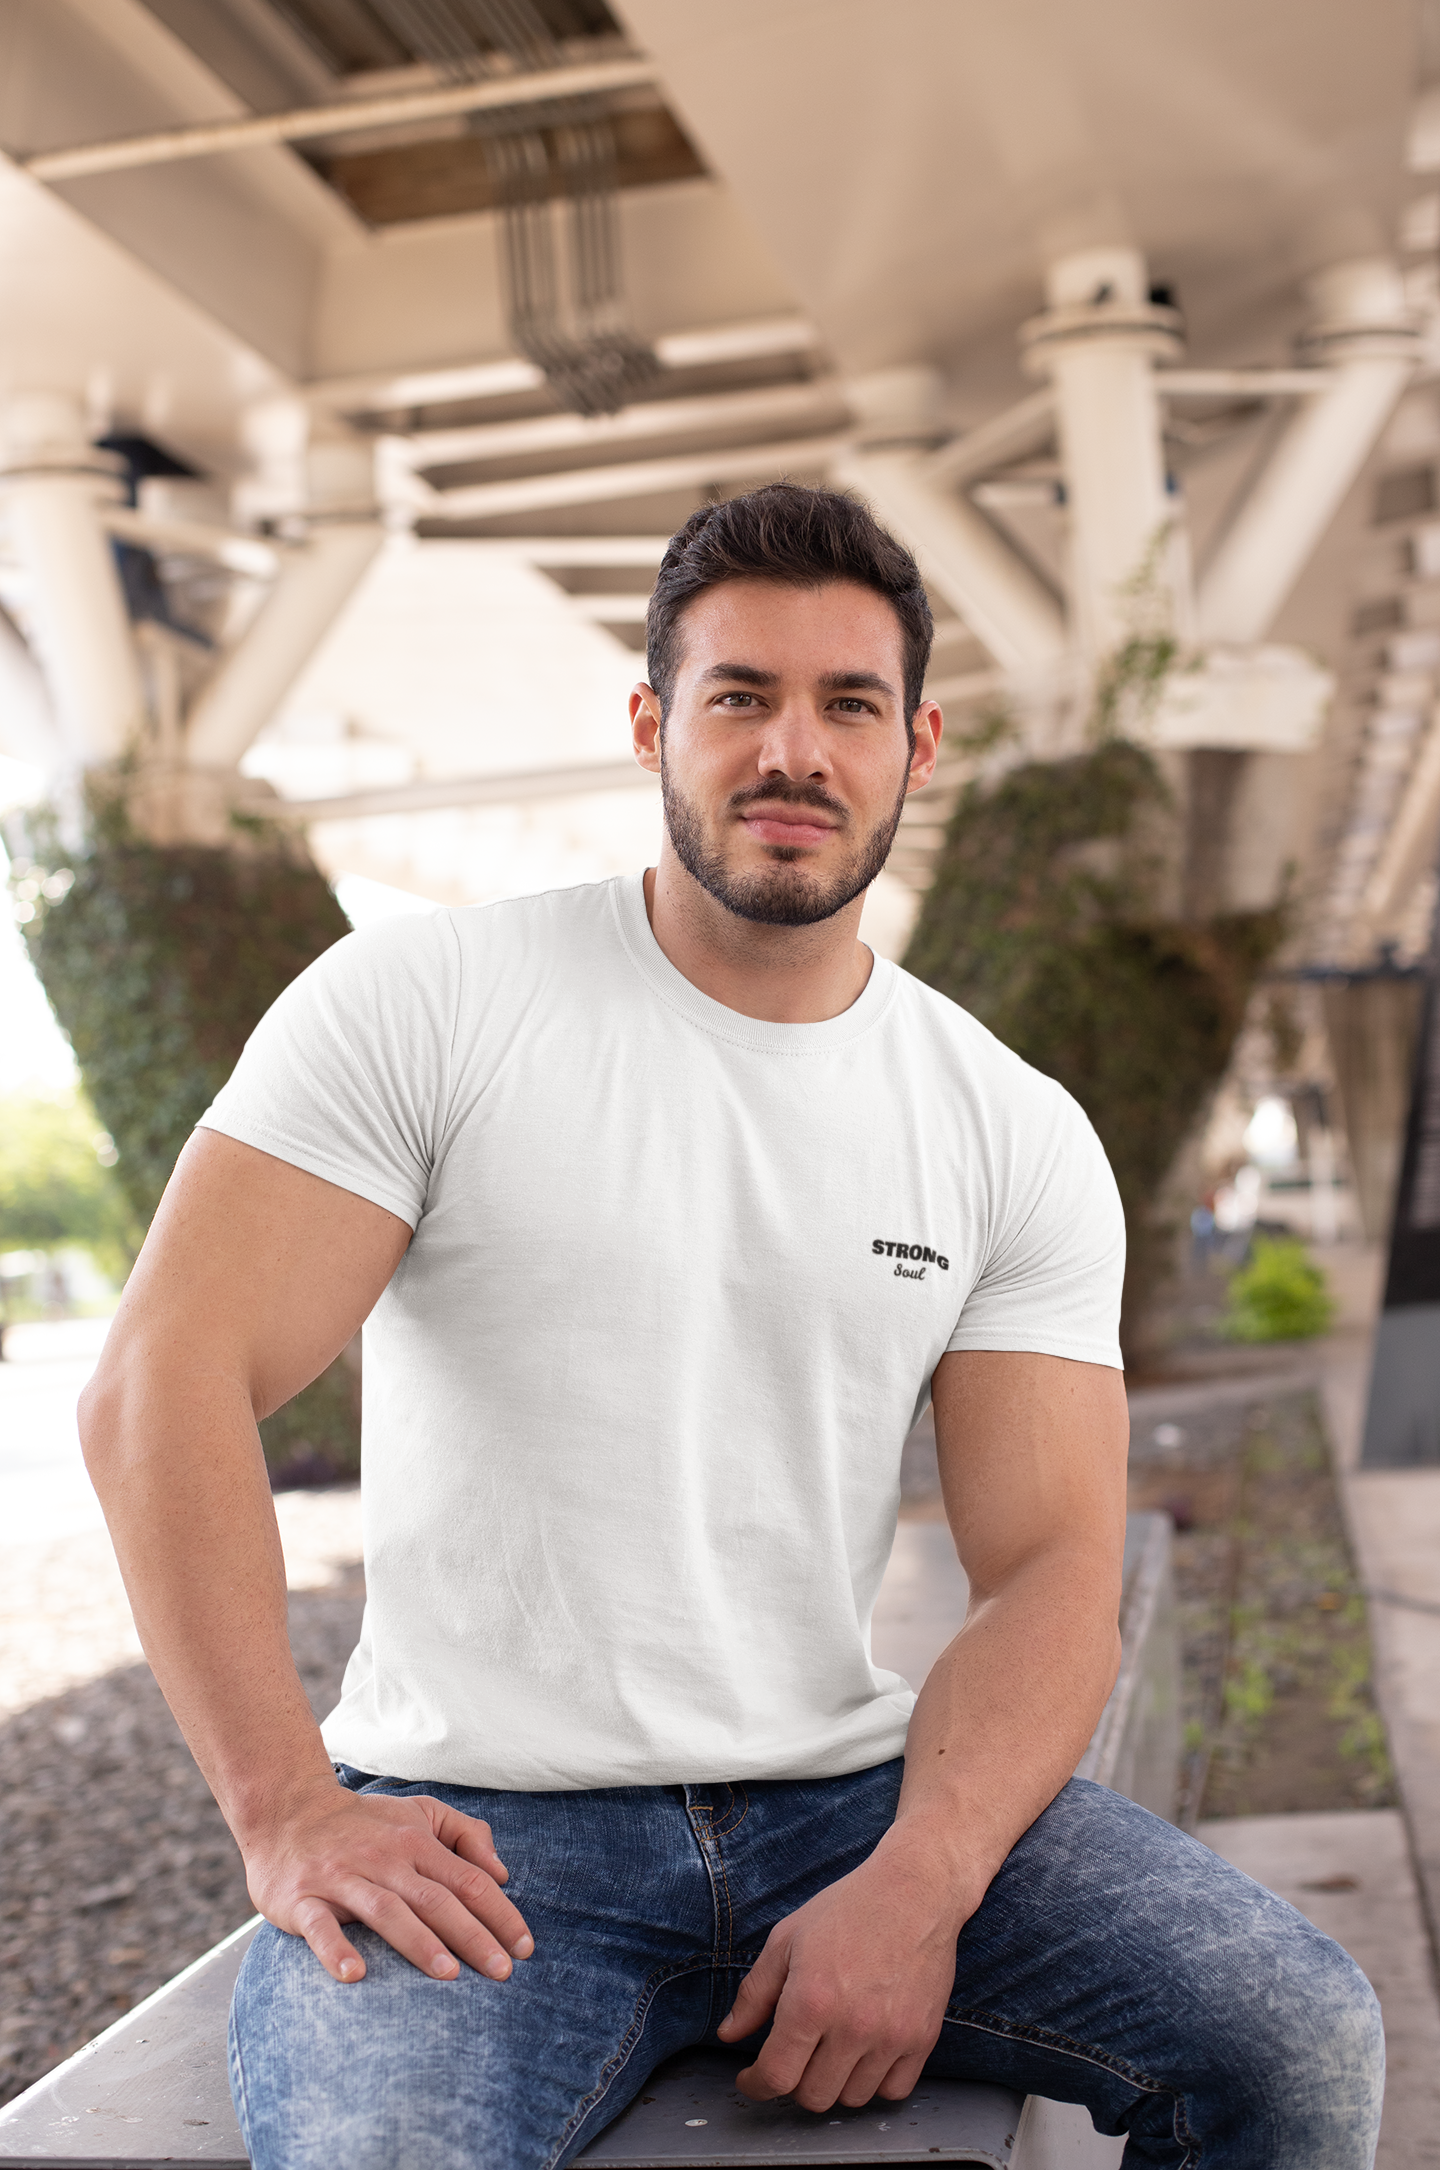 White Solid - Gym T Shirt Strong Soul Shirts & Tops